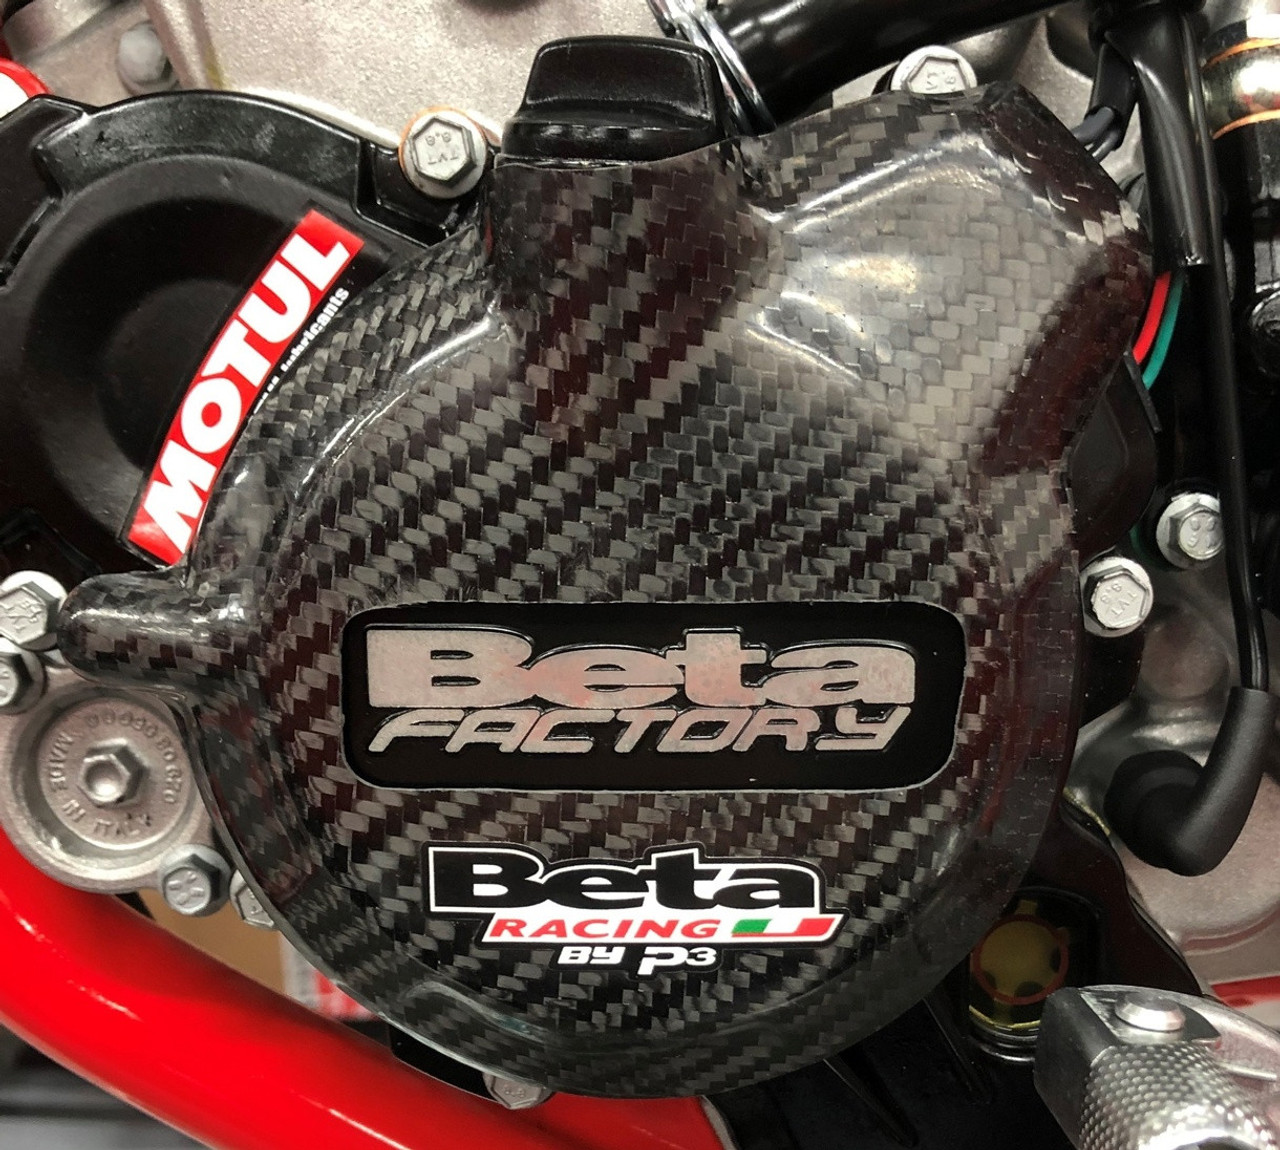 P3 Carbon Clutch Cover, 2020+ 4 Stroke P3 Carbon Fiber Clutch Guard protects your clutch cover. Molded design perfectly shields stock clutch covers. High strength & light weight, using P3's race proven carbon. Protects against brake lever impact, abrasion, & crash imapact.